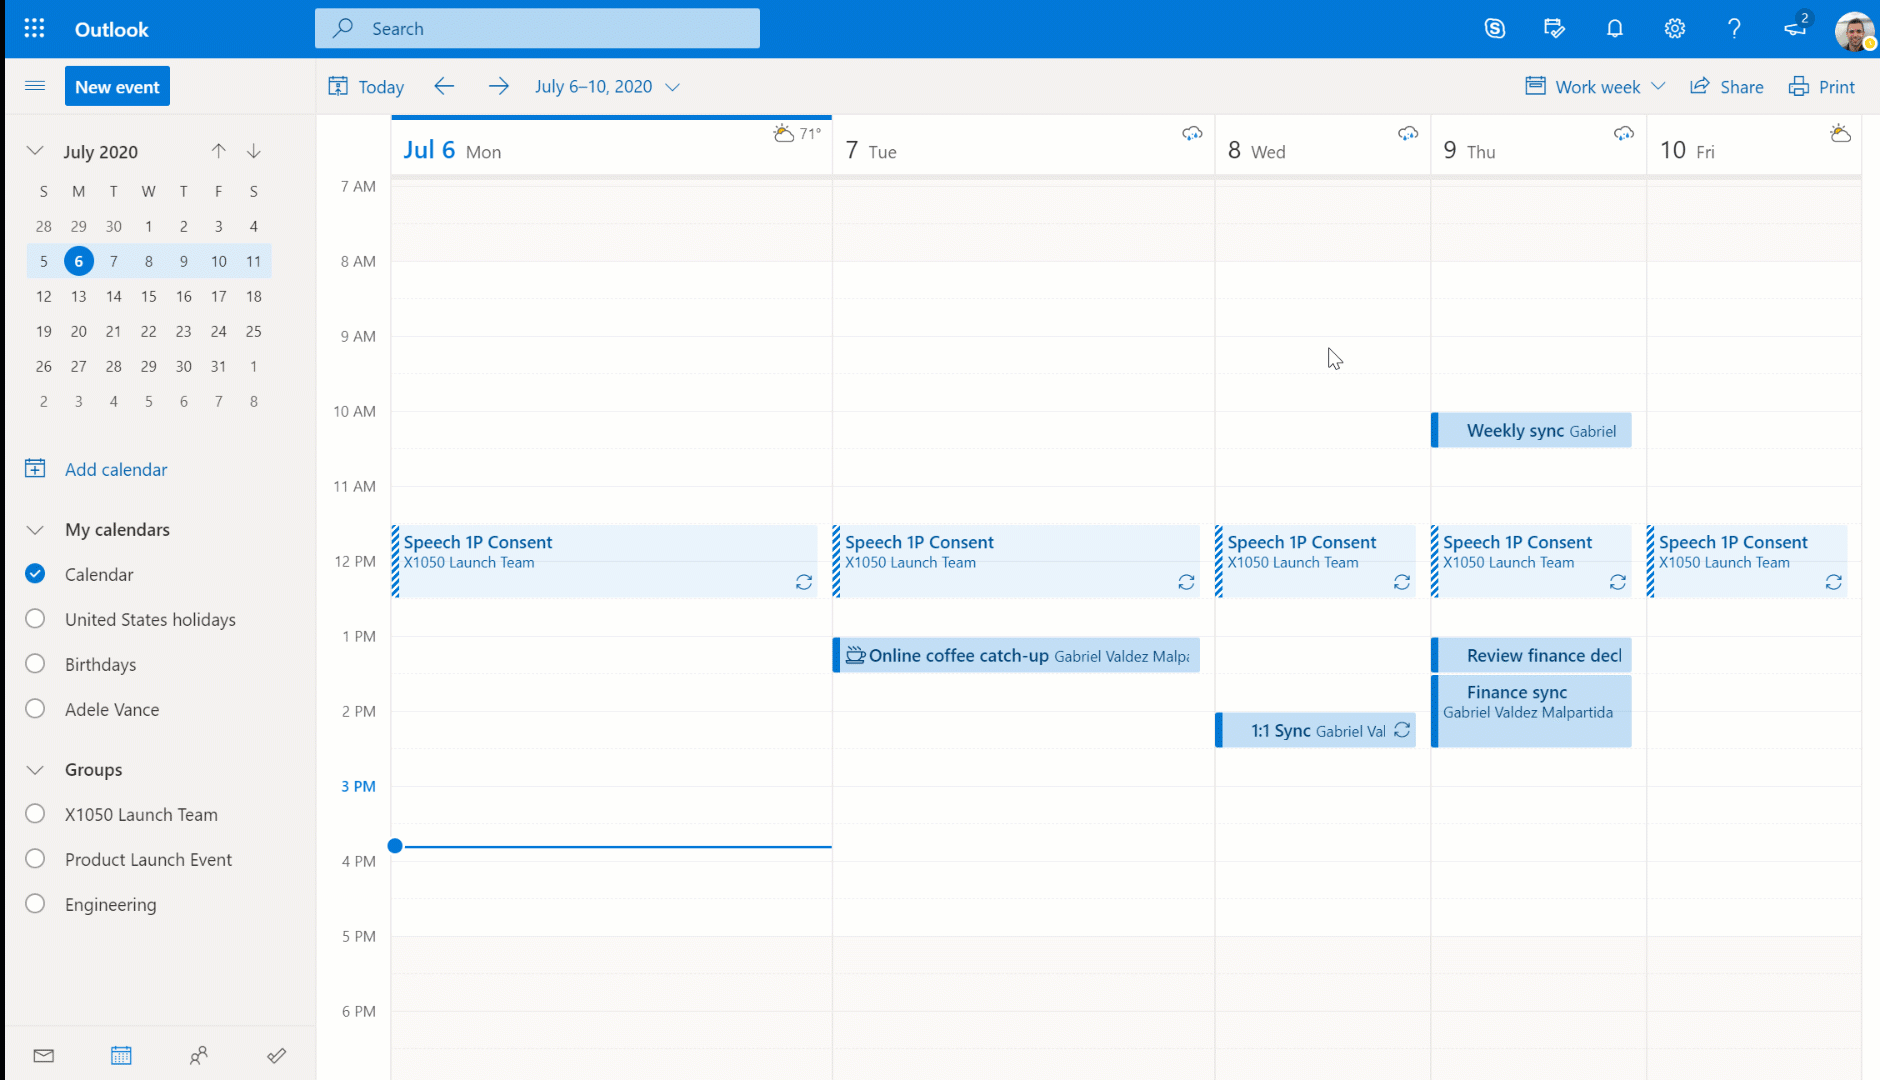 Get more control of your day with Microsoft 365 and new Outlook Add-a-personal-calendar-so-your-coworkers-know-when-your-real-availability-is.gif